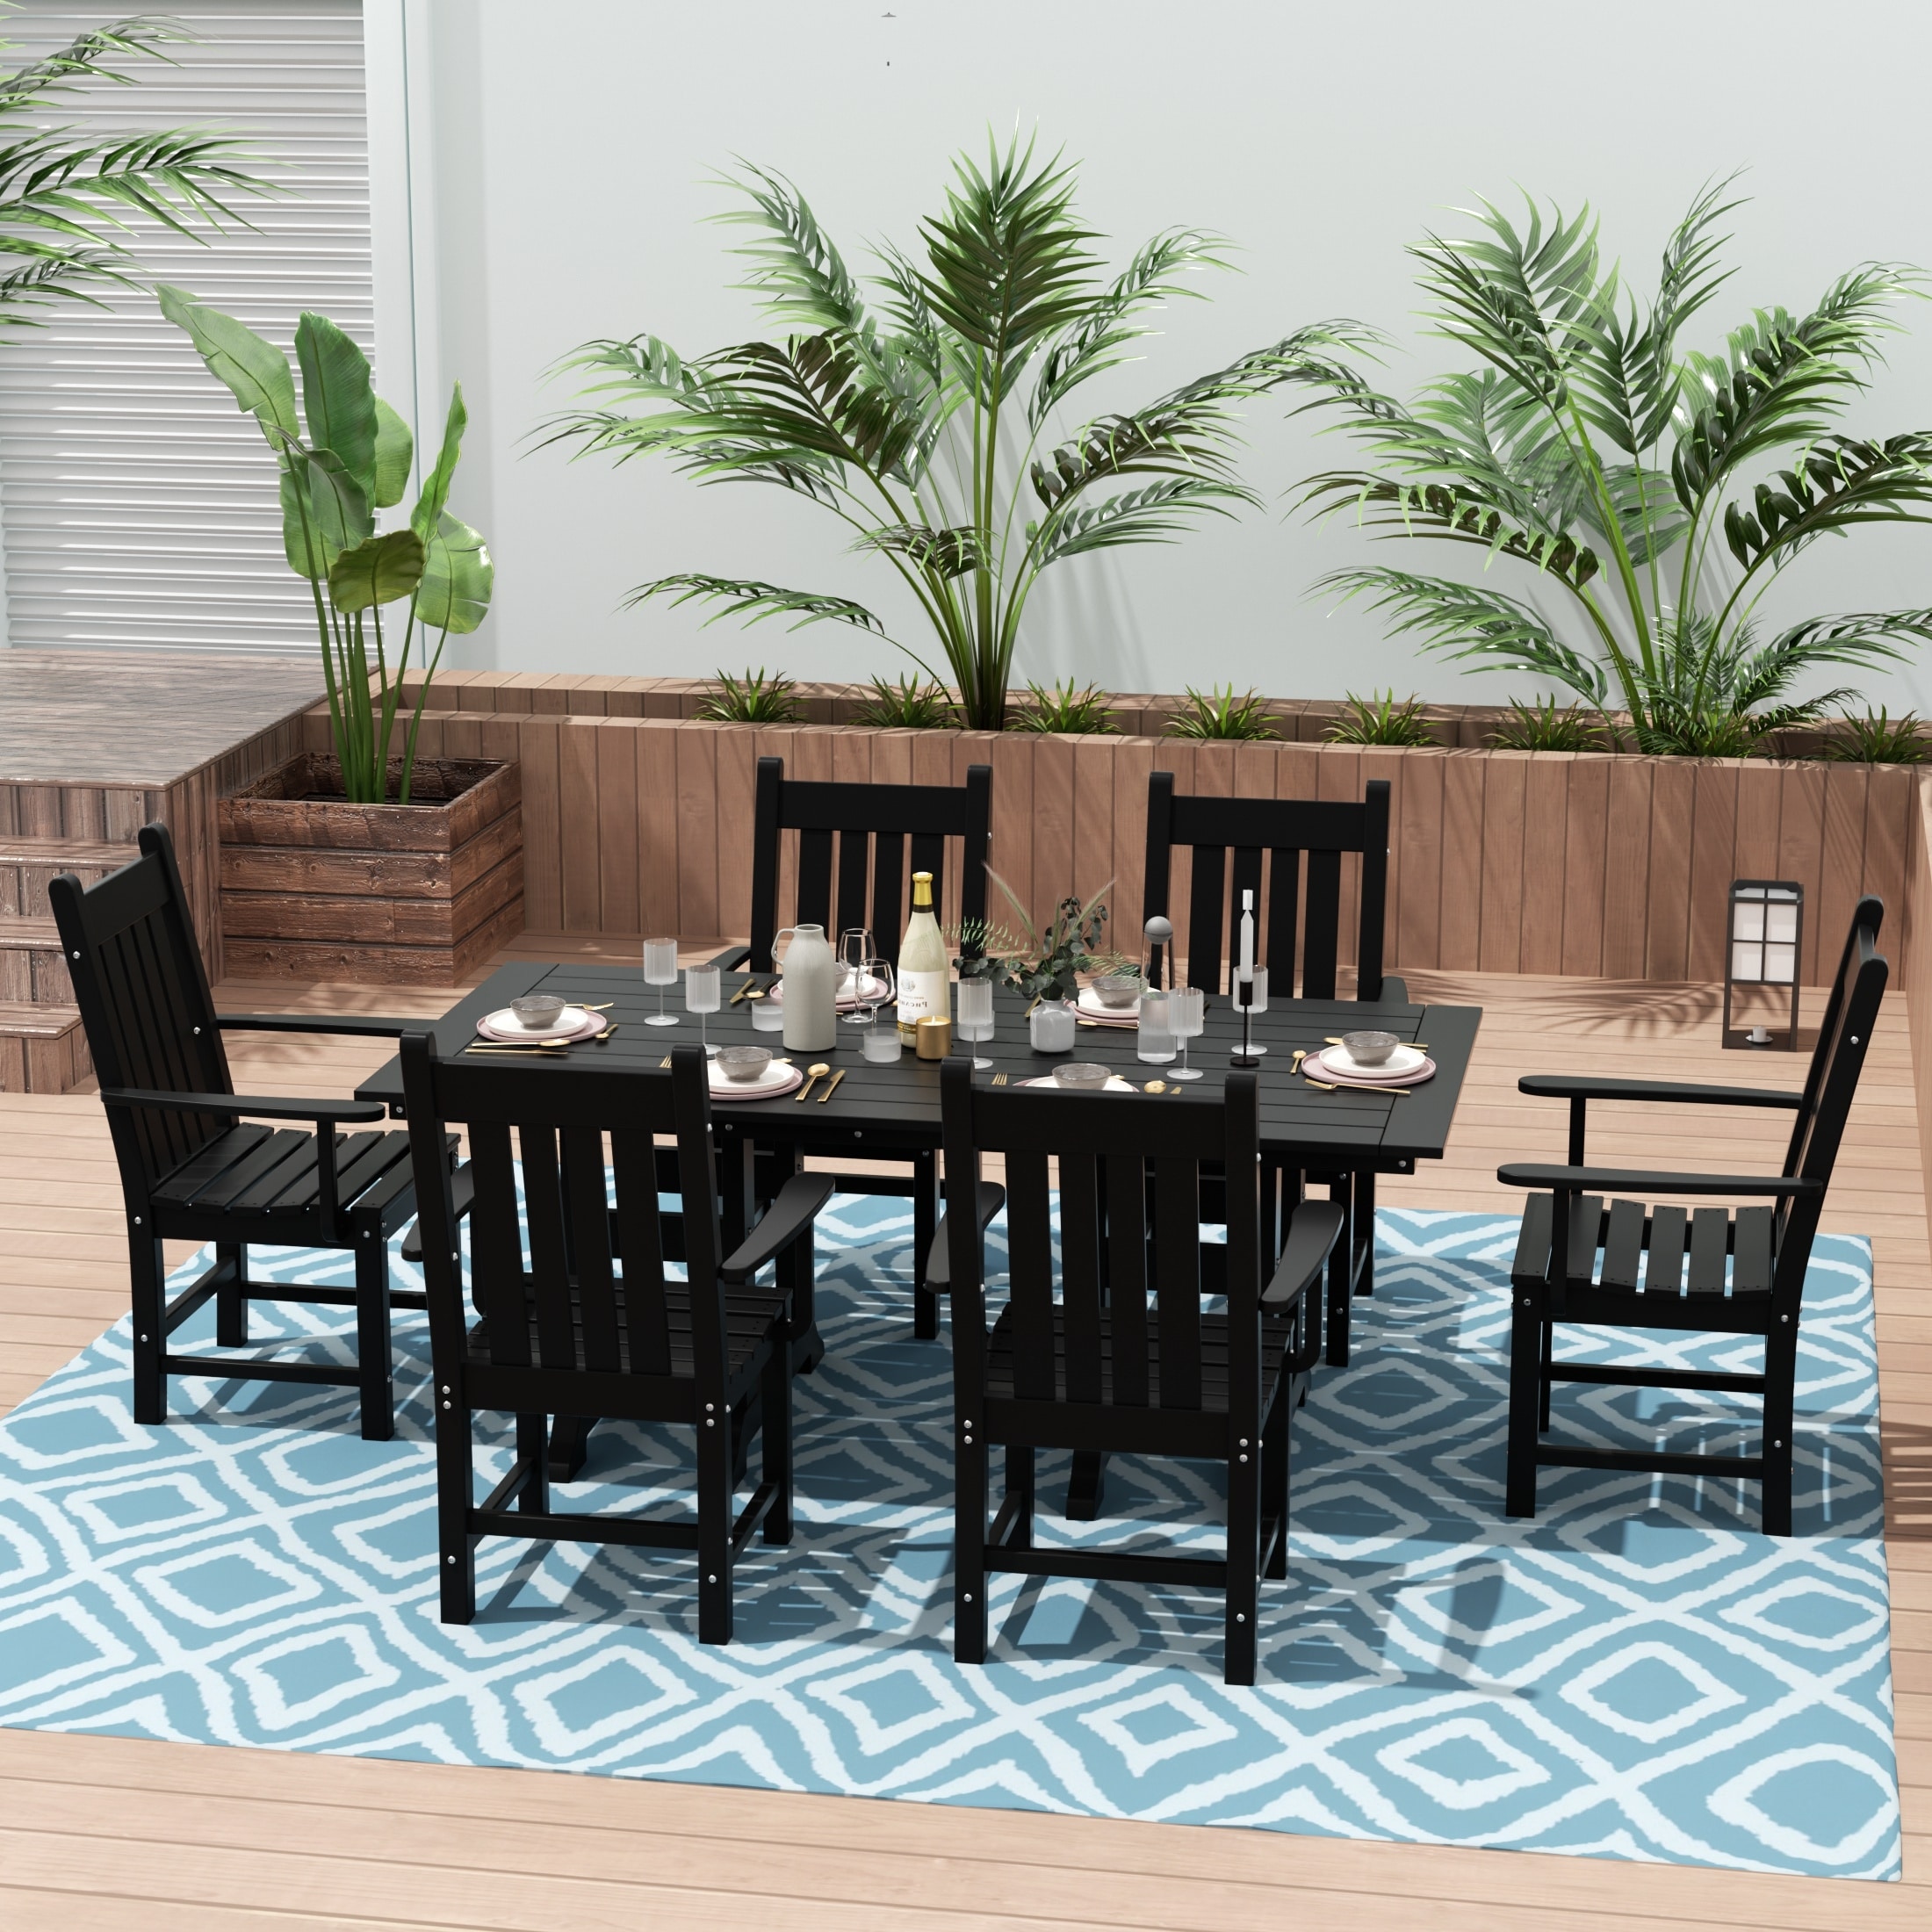 Standard, Top Rated Patio Furniture - Bed Bath & Beyond